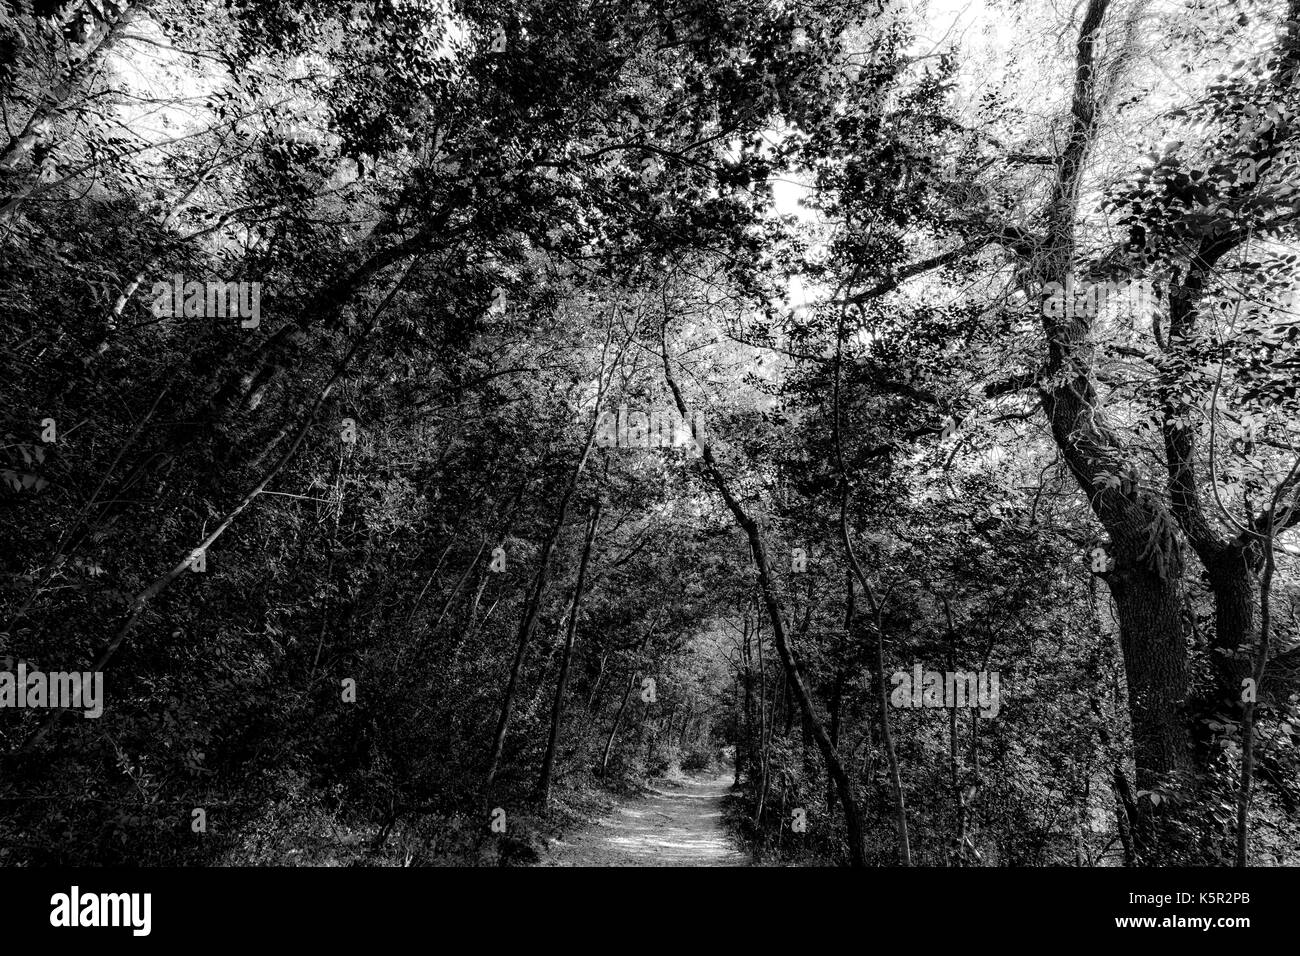 A small path running through a wood, with trees and intricate leaves details and textures Stock Photo